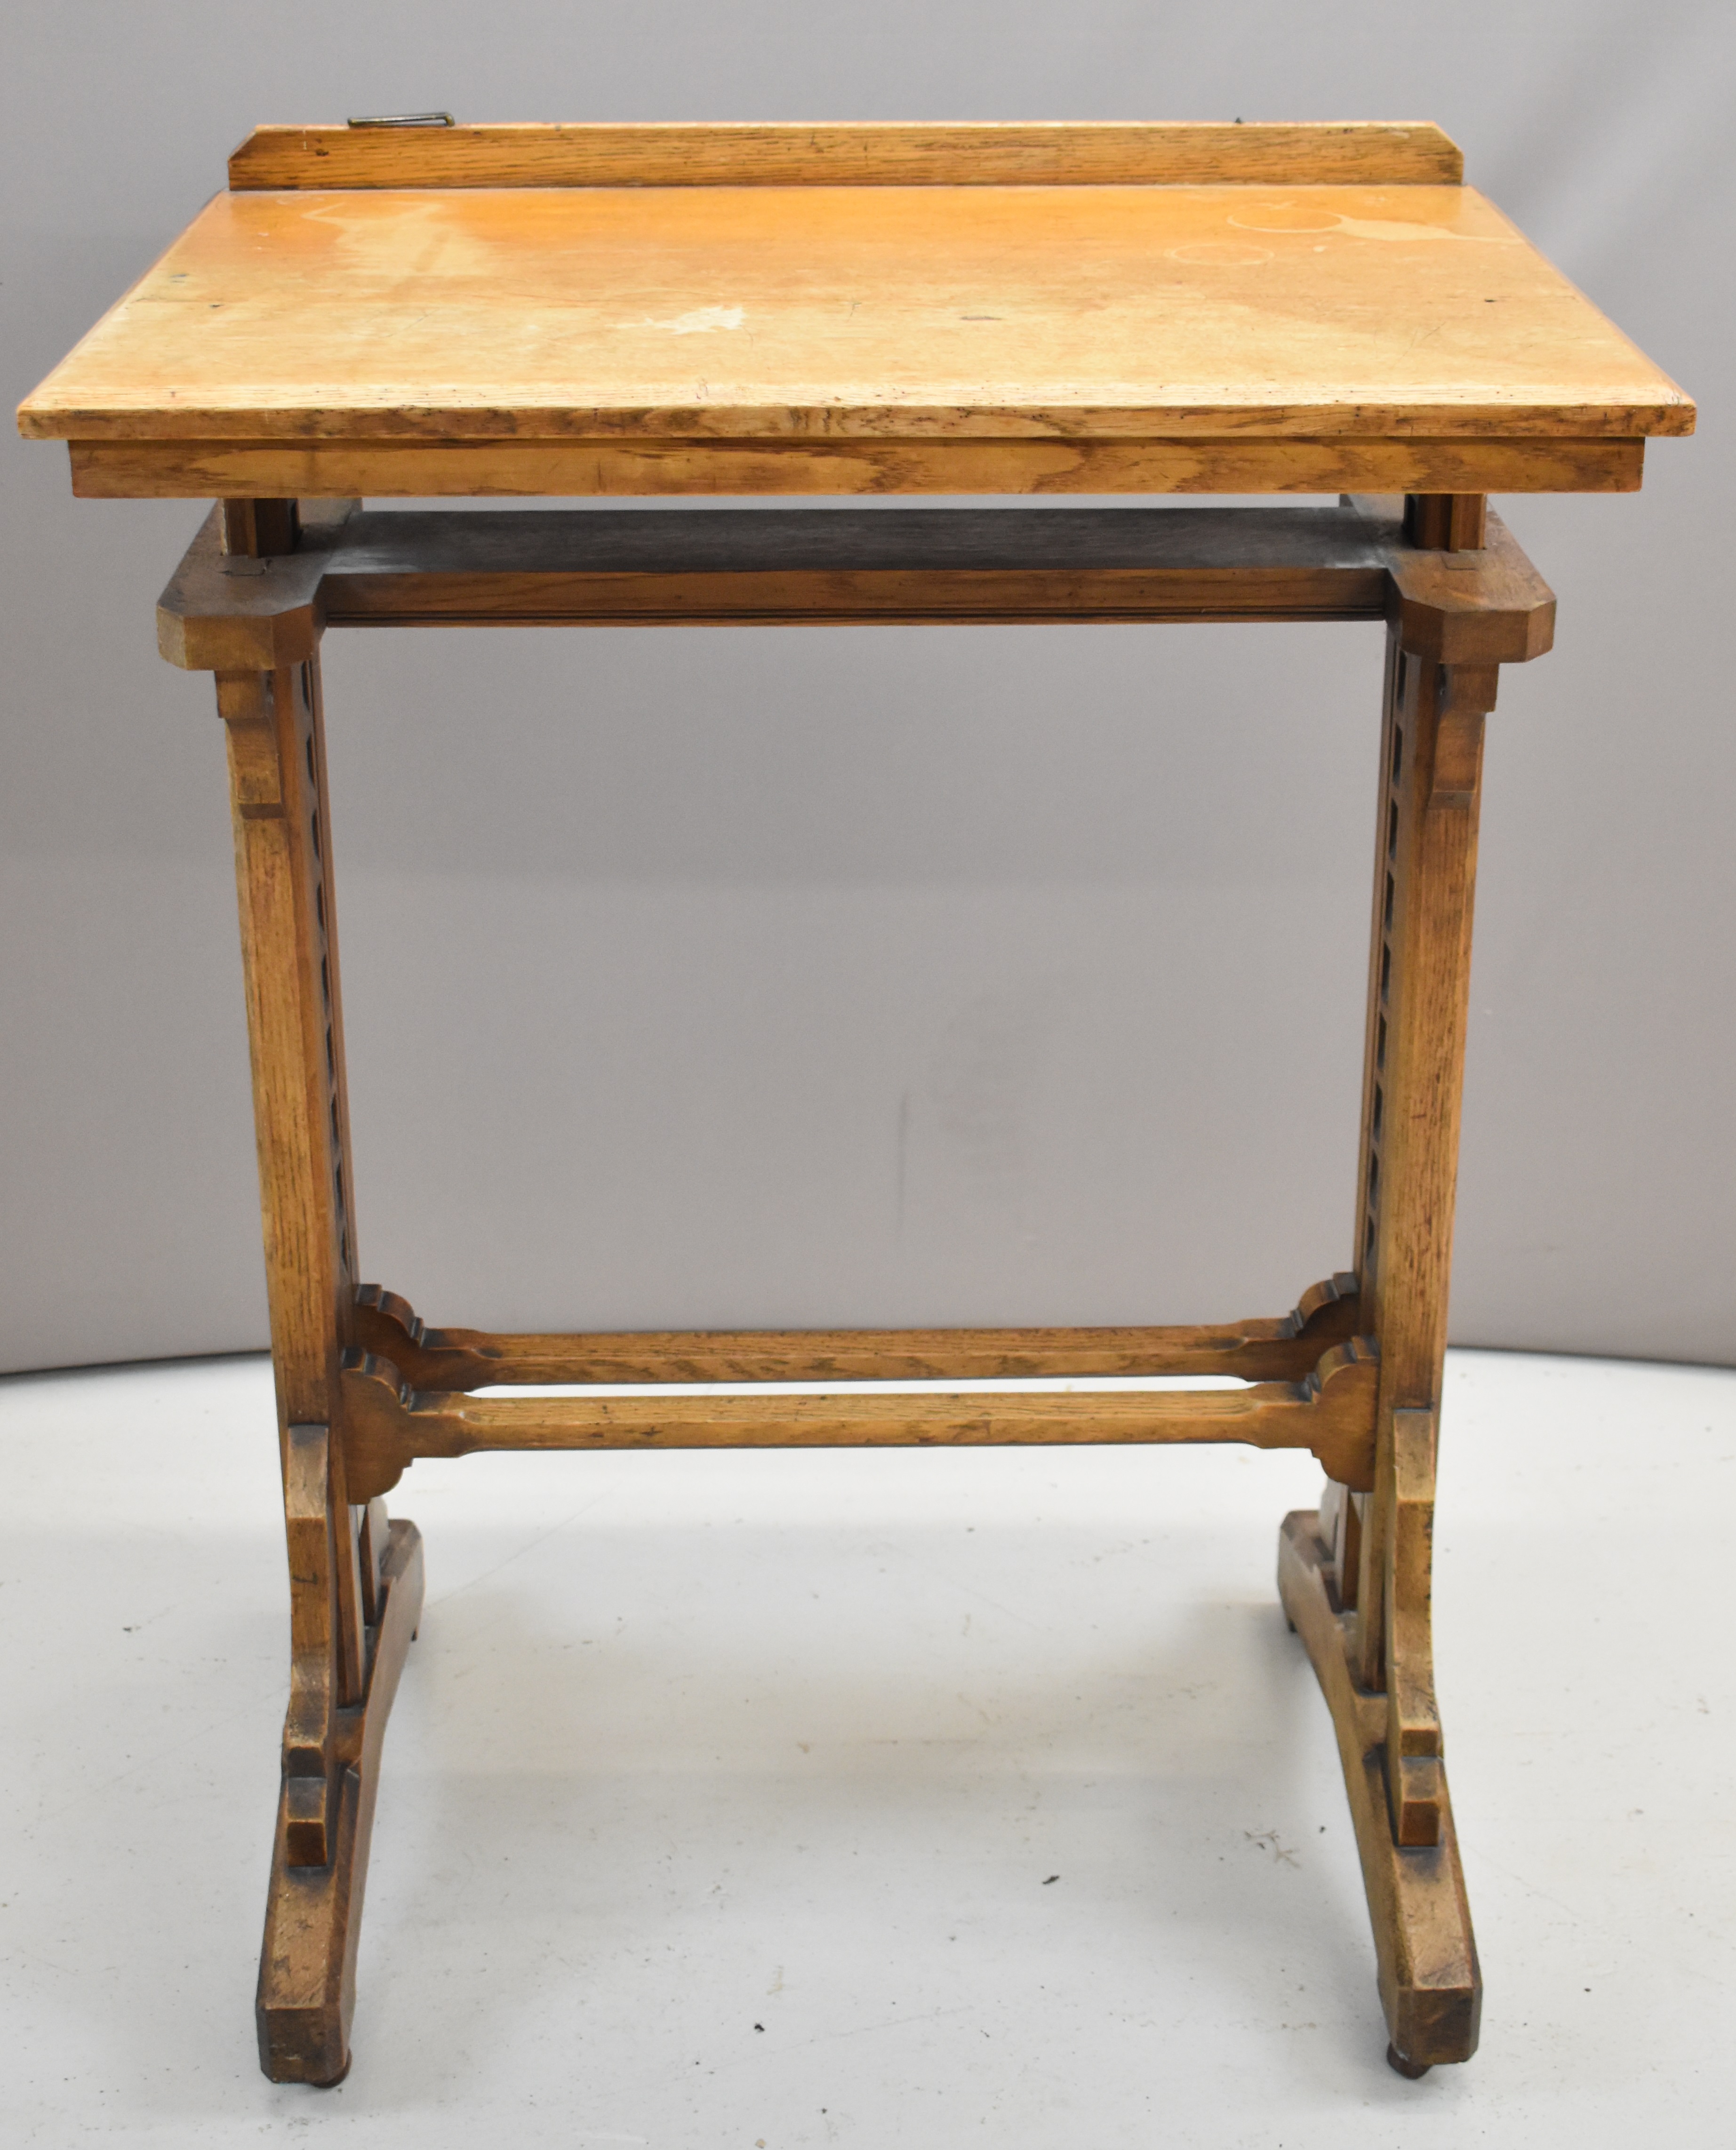 Victorian oak Gothic or Arts & Crafts style lectern with adjustable height and angle, minimum height